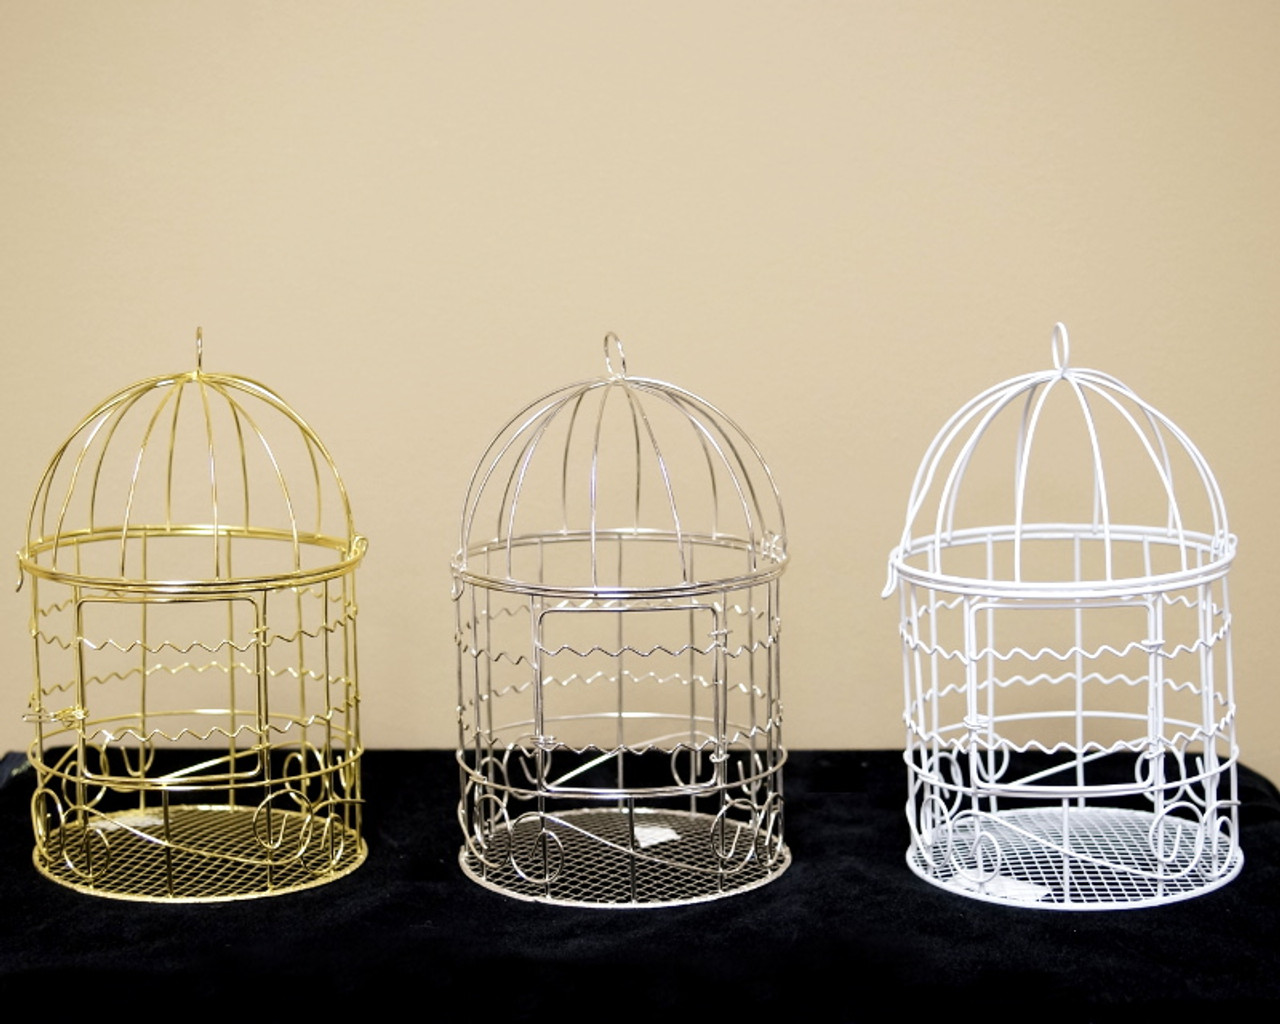 3 Mini Decorative Silver Bird Cages - Pack of 12 Mini Bird Cages